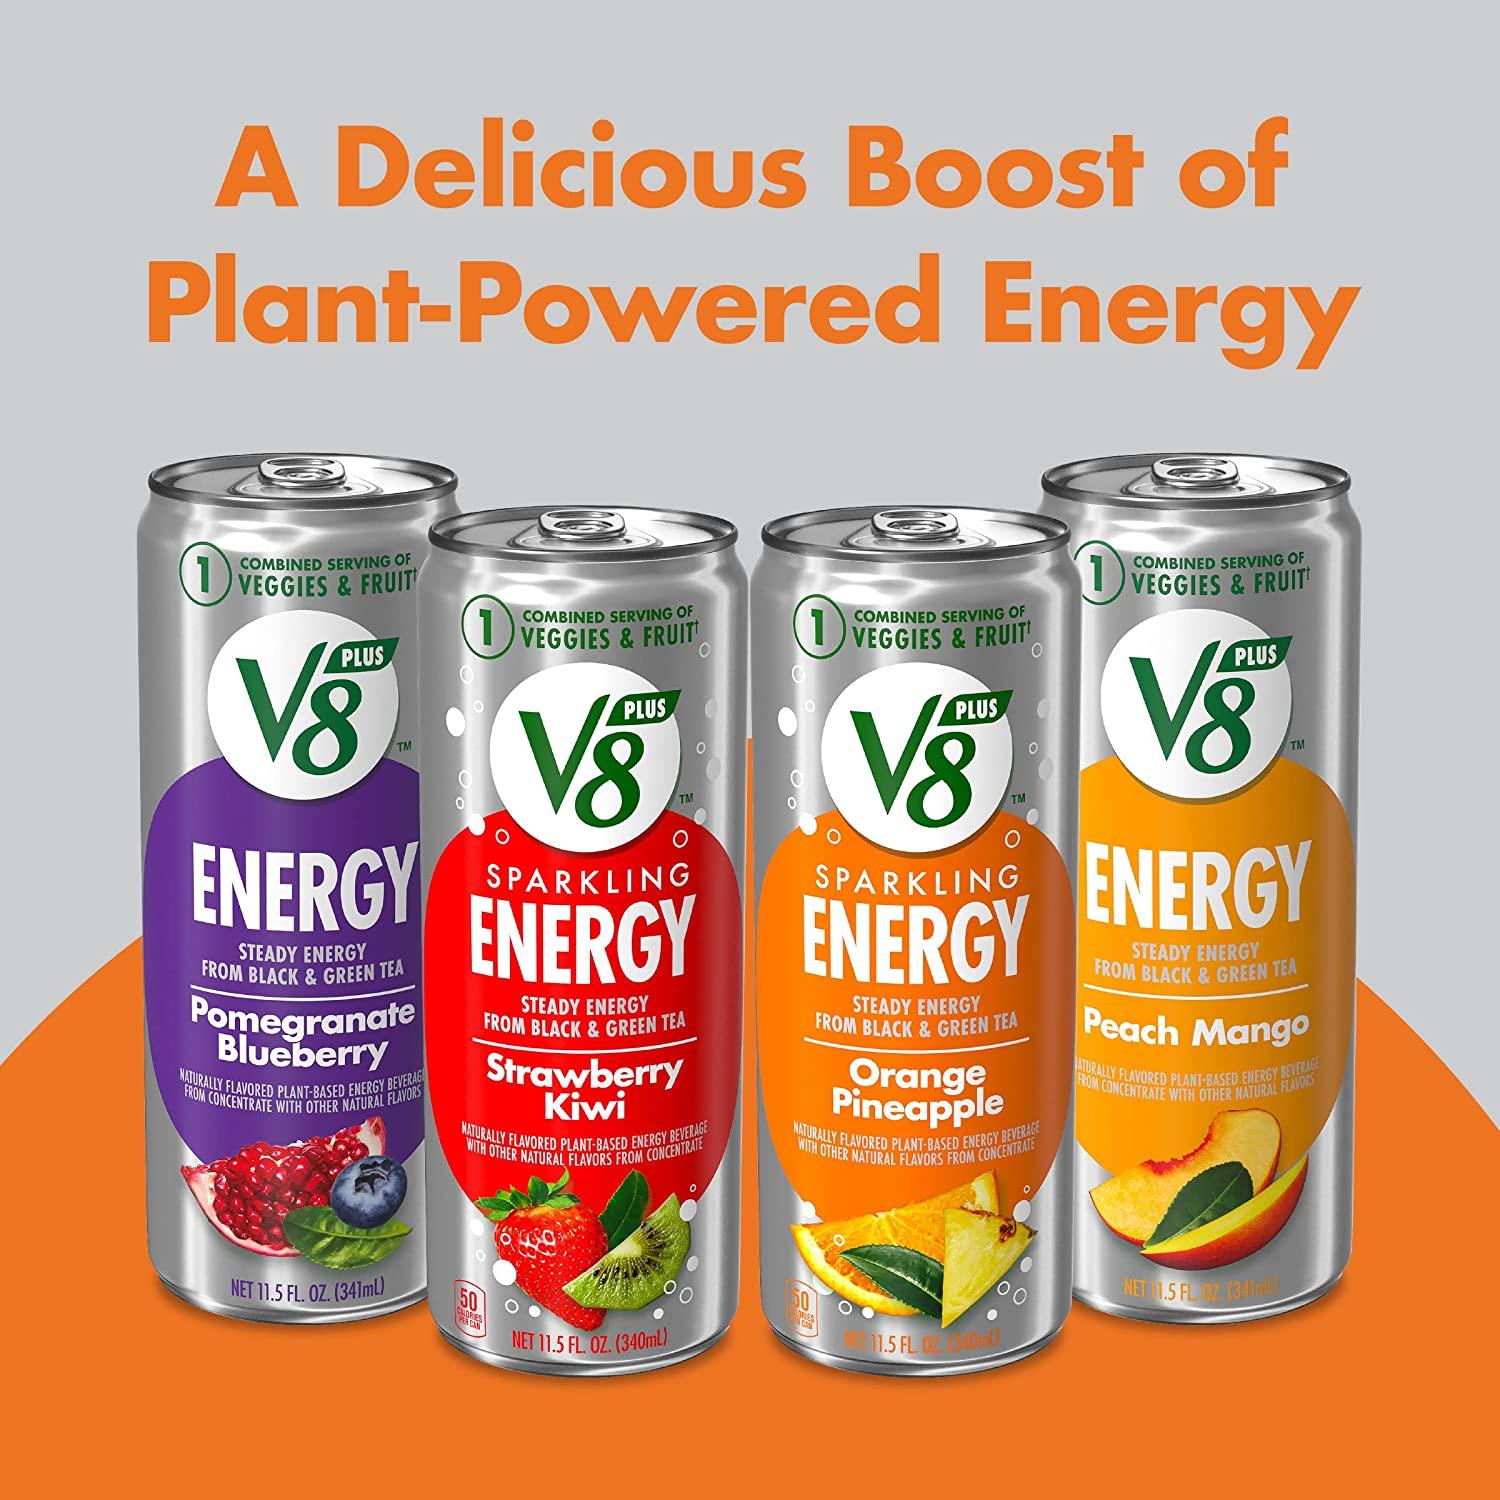 V8 Sparkling Energy Orange Pineapple Energy Drink Made With Real